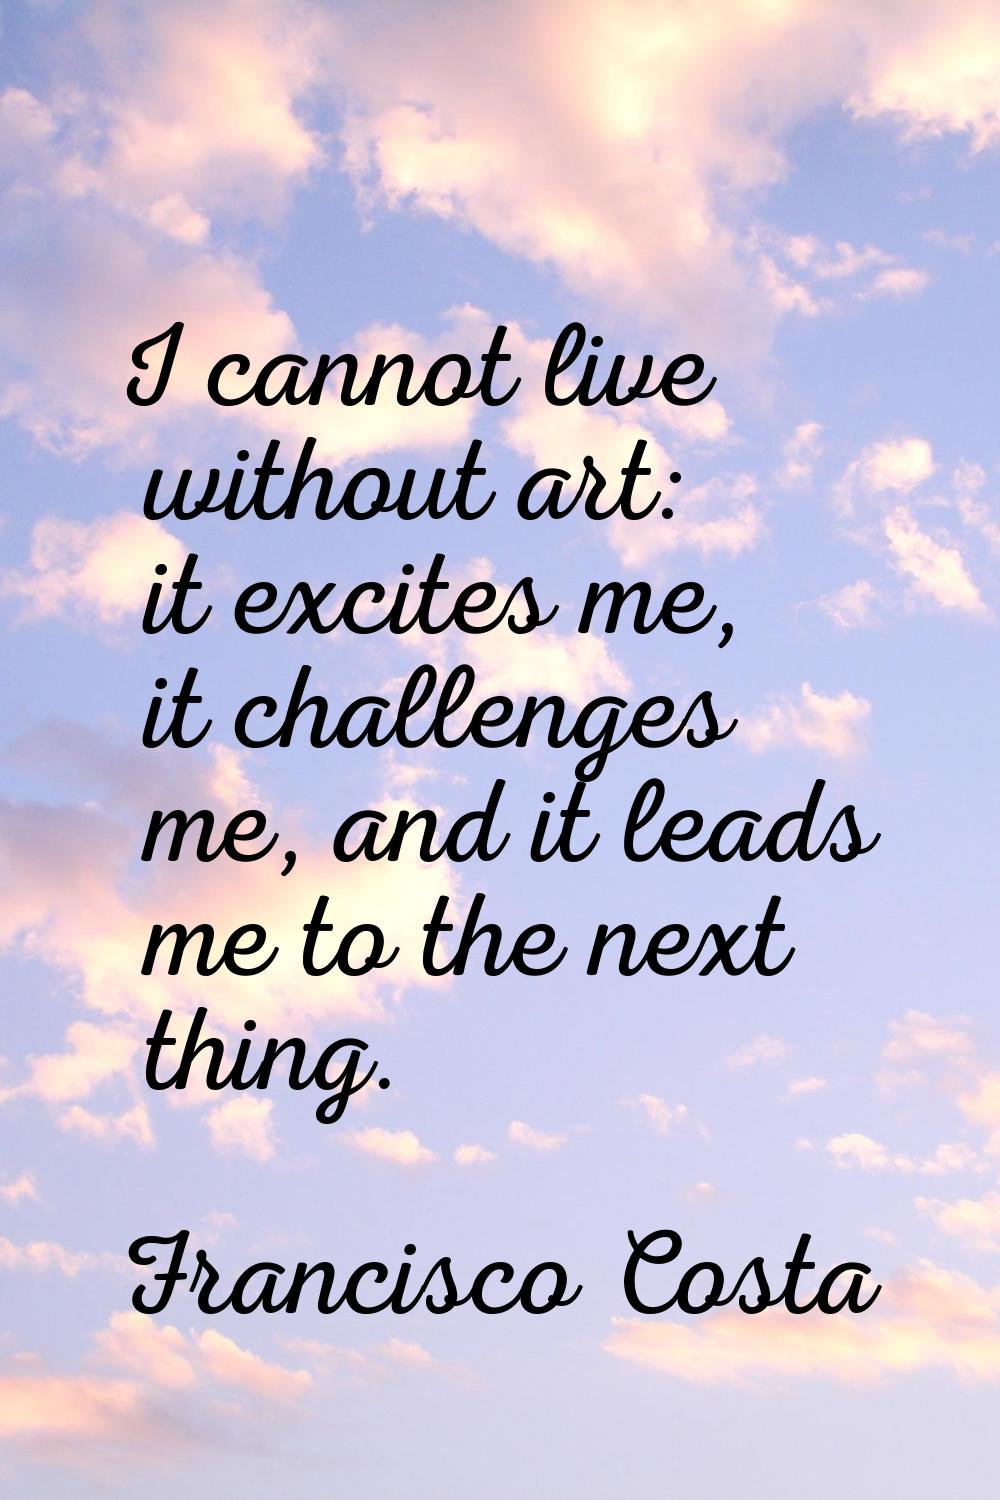 I cannot live without art: it excites me, it challenges me, and it leads me to the next thing.